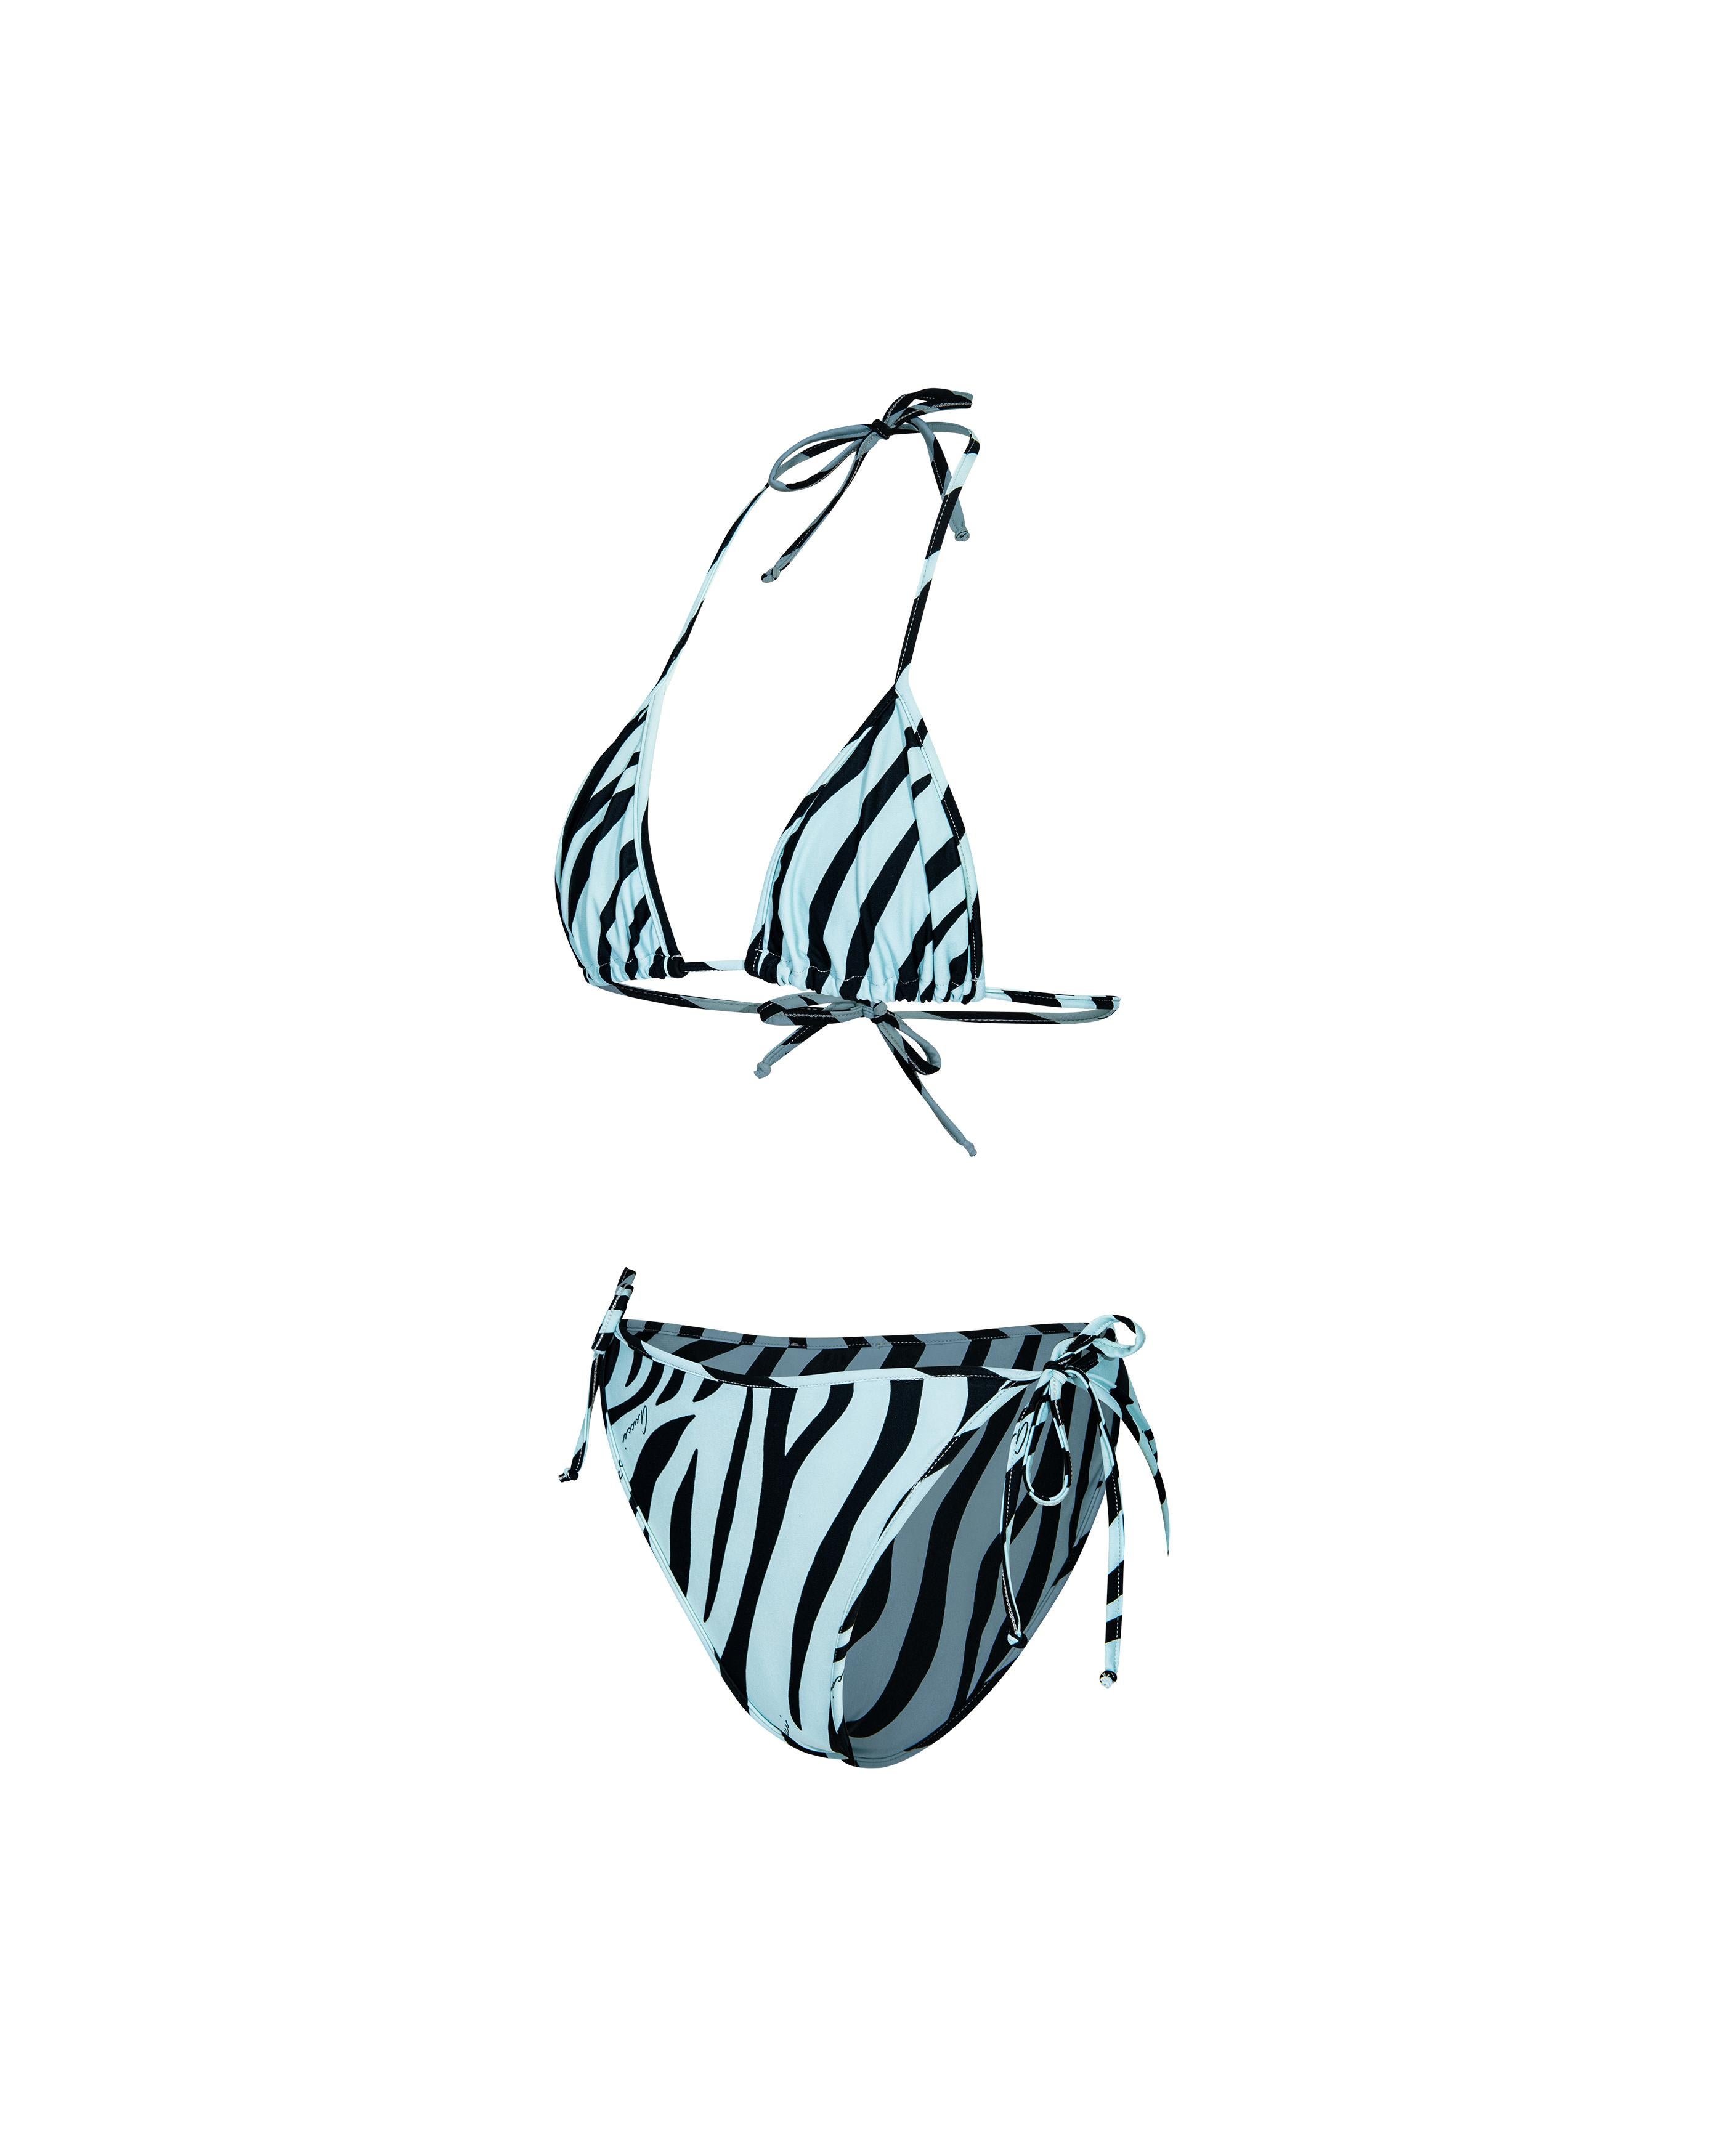 S/S 1996 Gucci by Tom Ford Blue and Black Zebra Print String Bikini In Excellent Condition For Sale In North Hollywood, CA